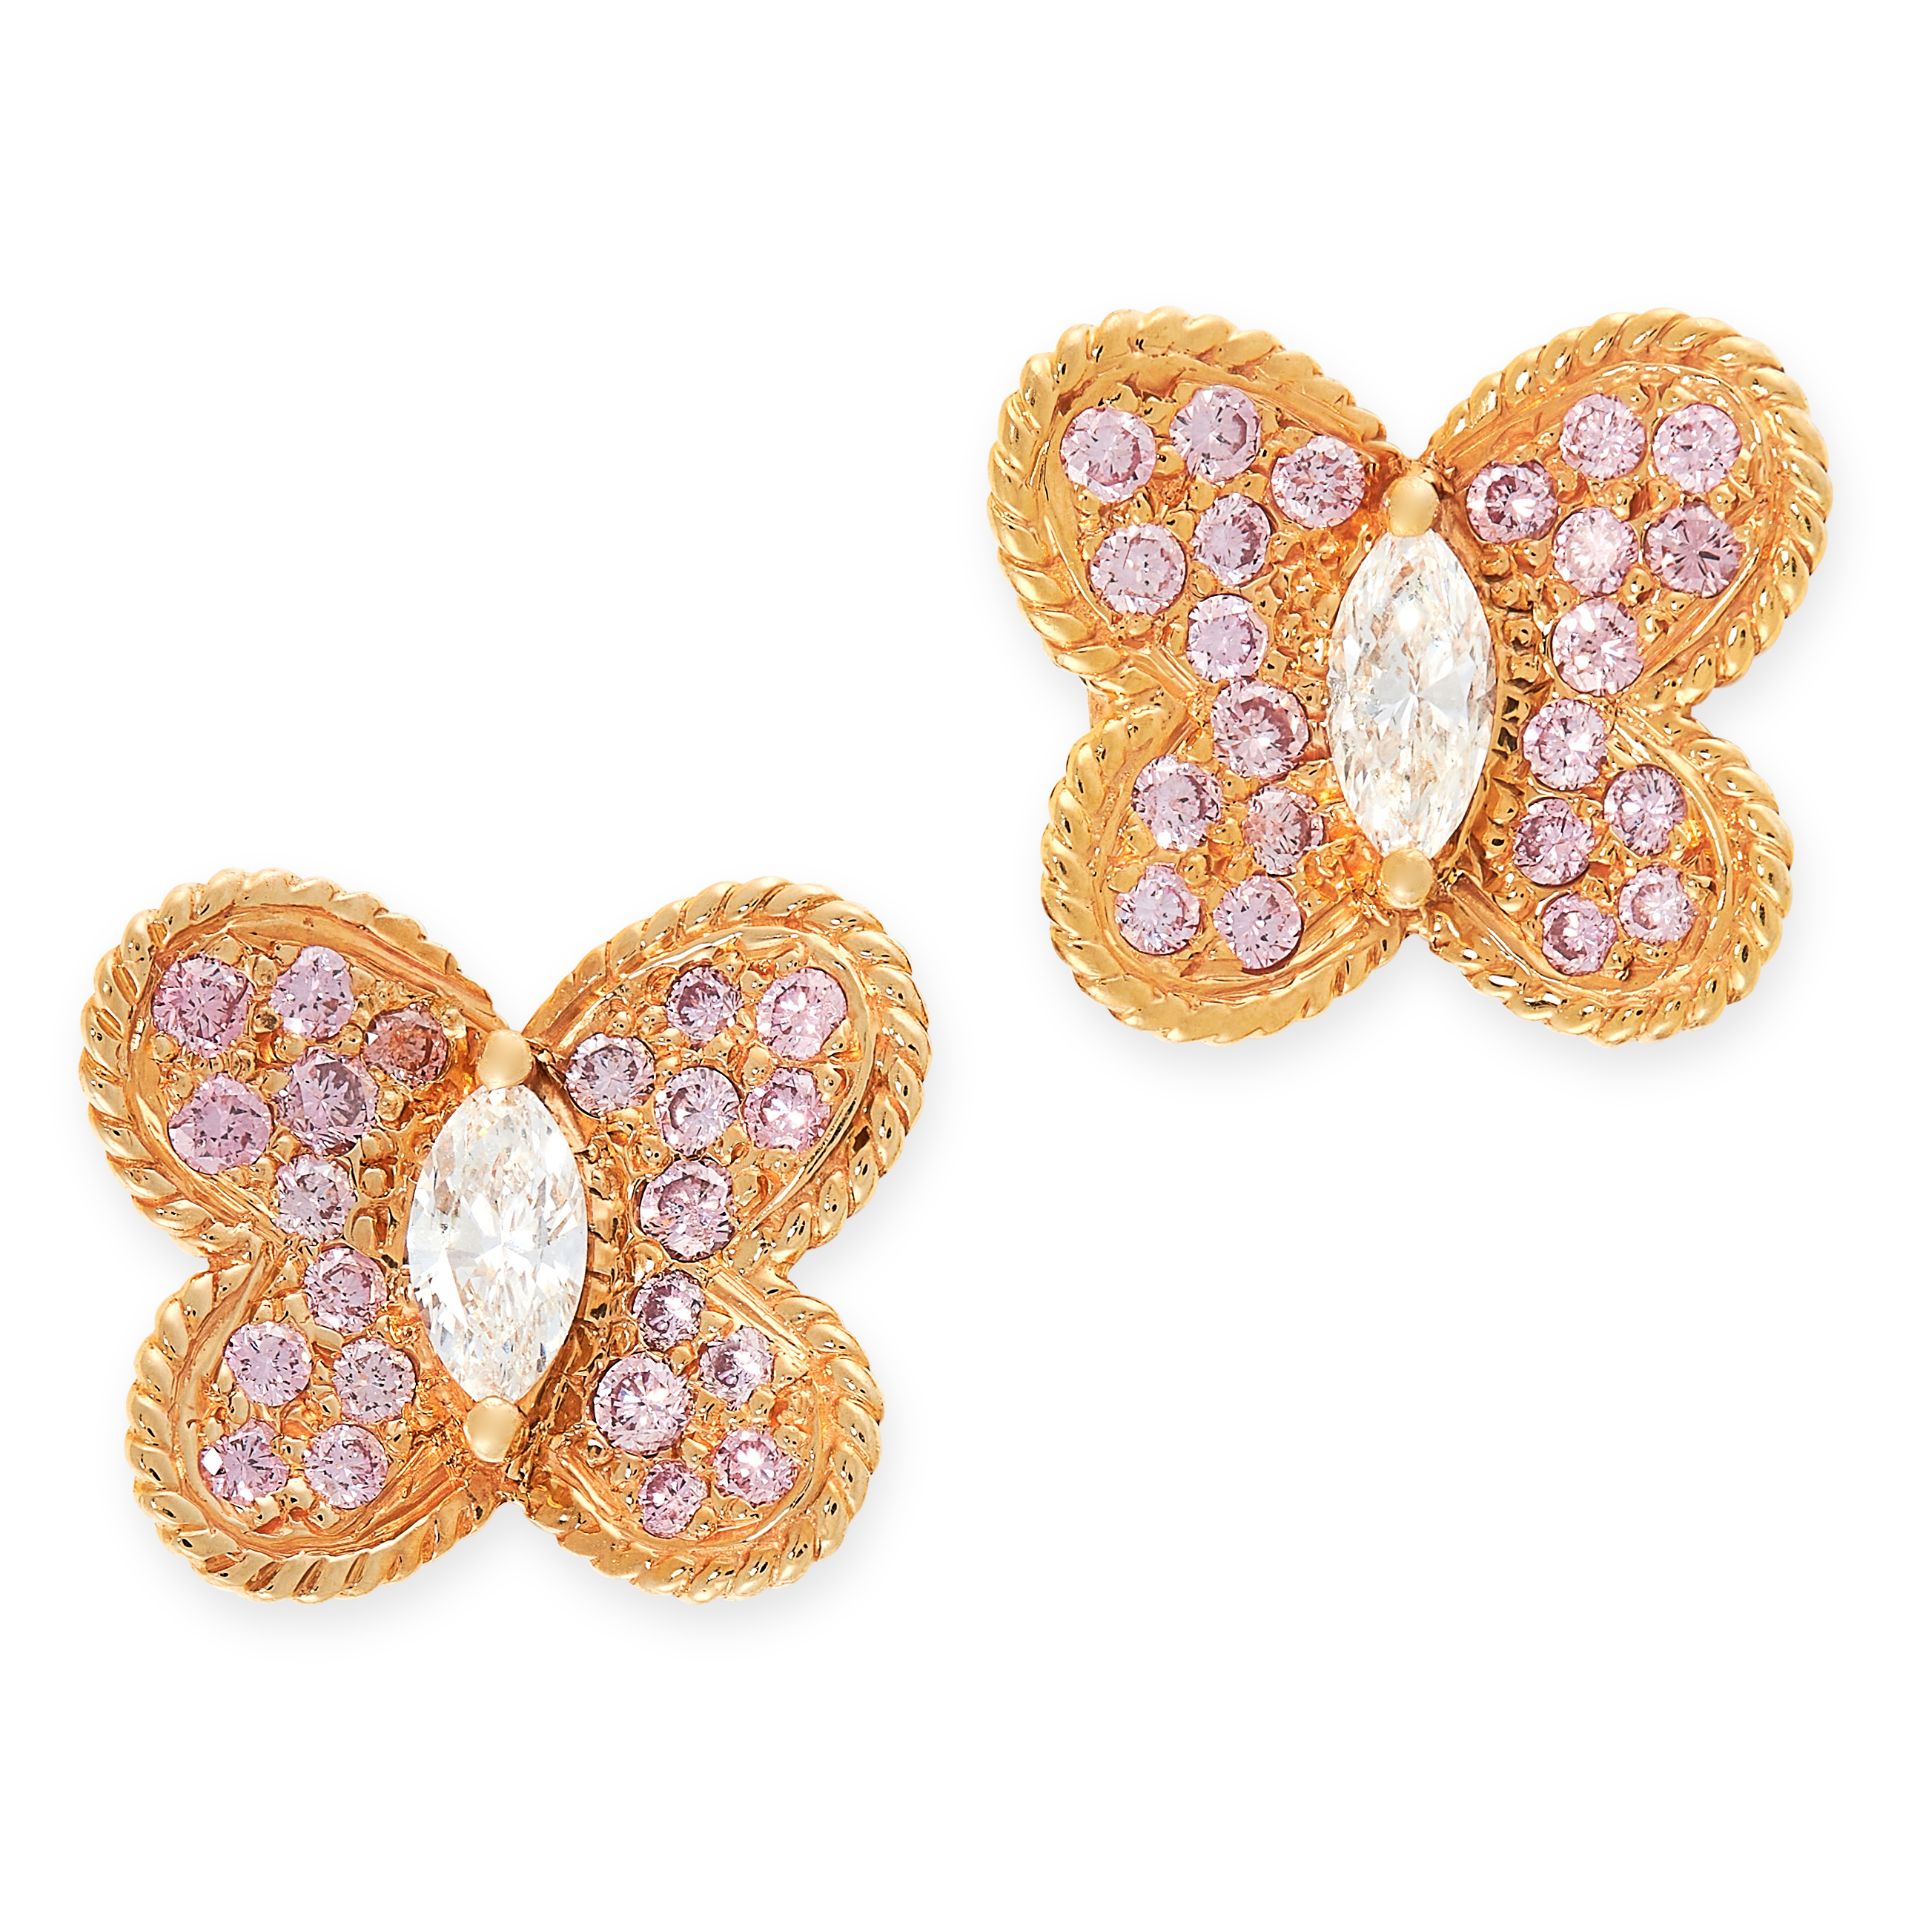 A PAIR OF PINK DIAMOND AND WHITE DIAMOND EARRINGS, GRAFF in 18ct yellow gold, each designed as a